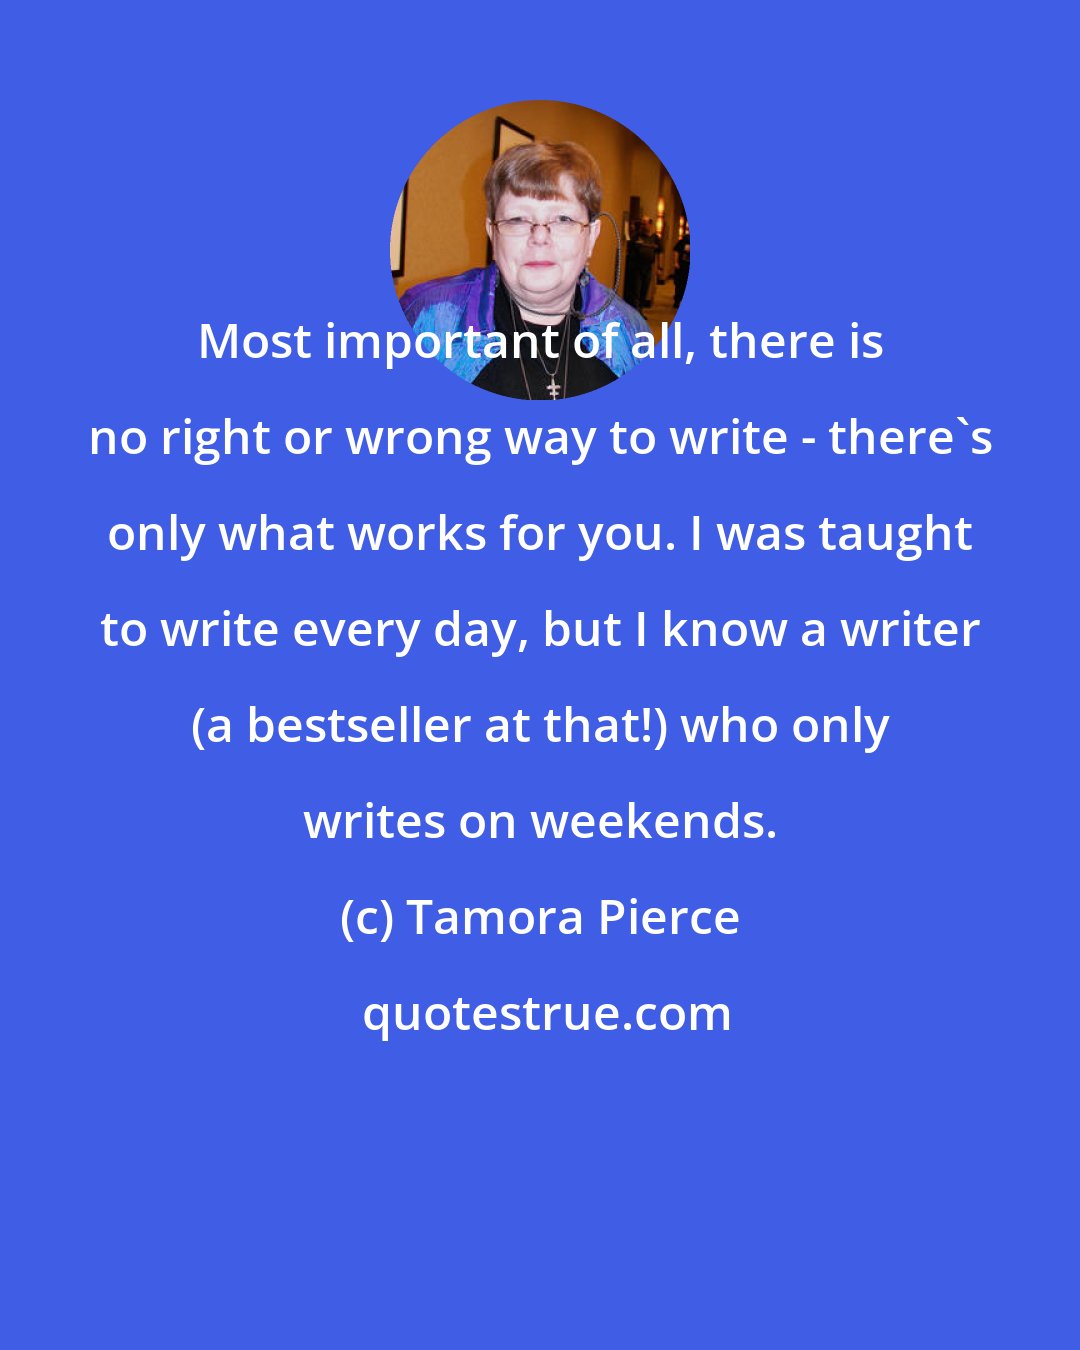 Tamora Pierce: Most important of all, there is no right or wrong way to write - there's only what works for you. I was taught to write every day, but I know a writer (a bestseller at that!) who only writes on weekends.